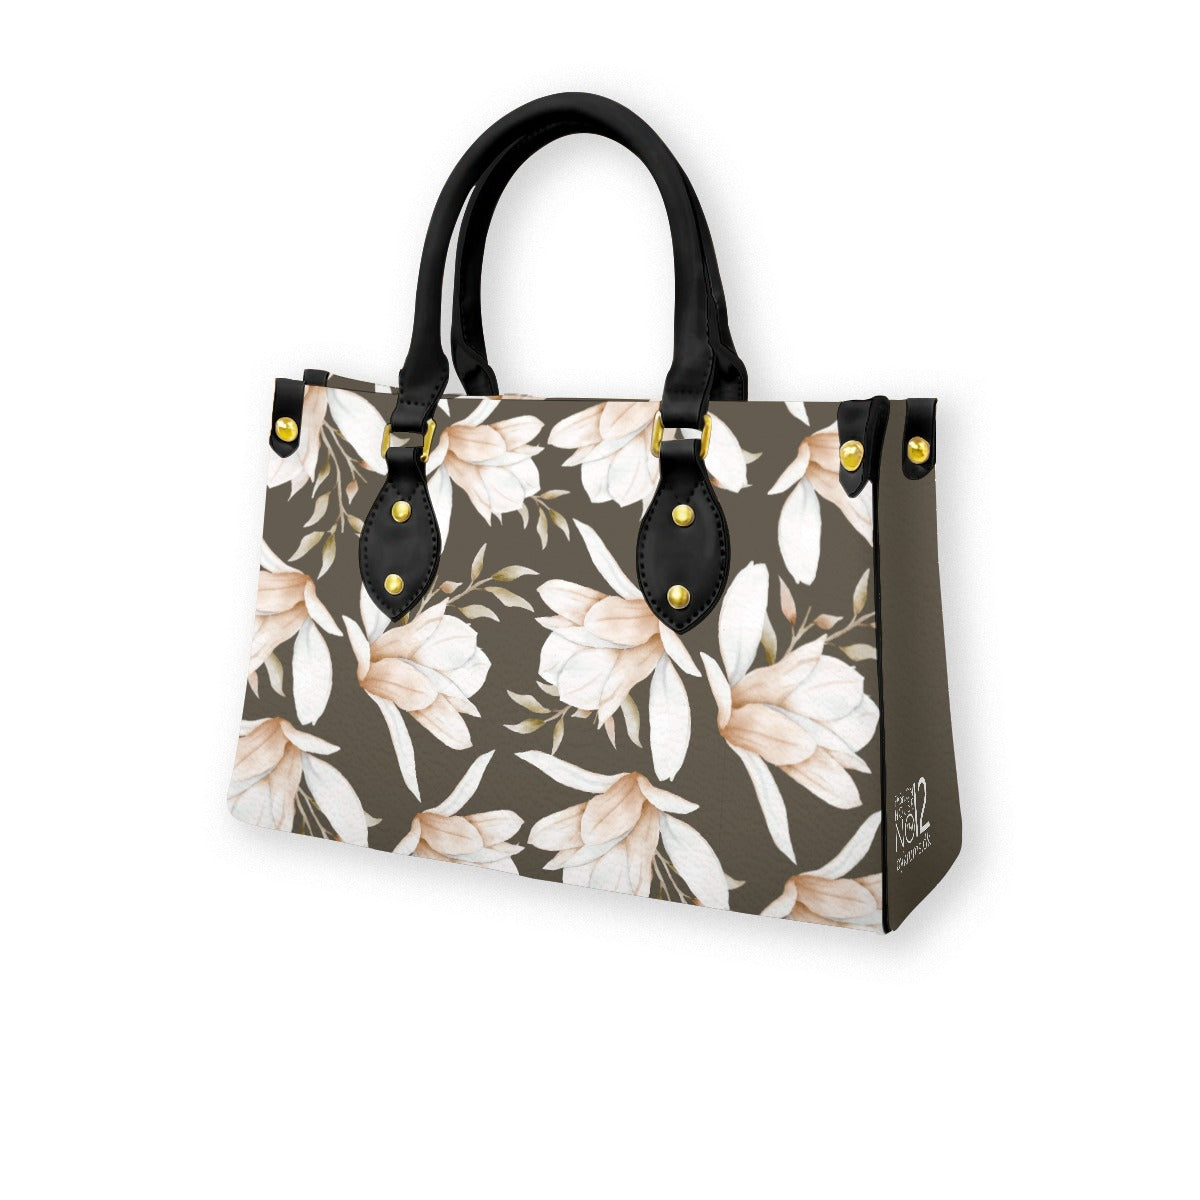 Women's Tote Bag With Black Handle brown background and off white flower pattern